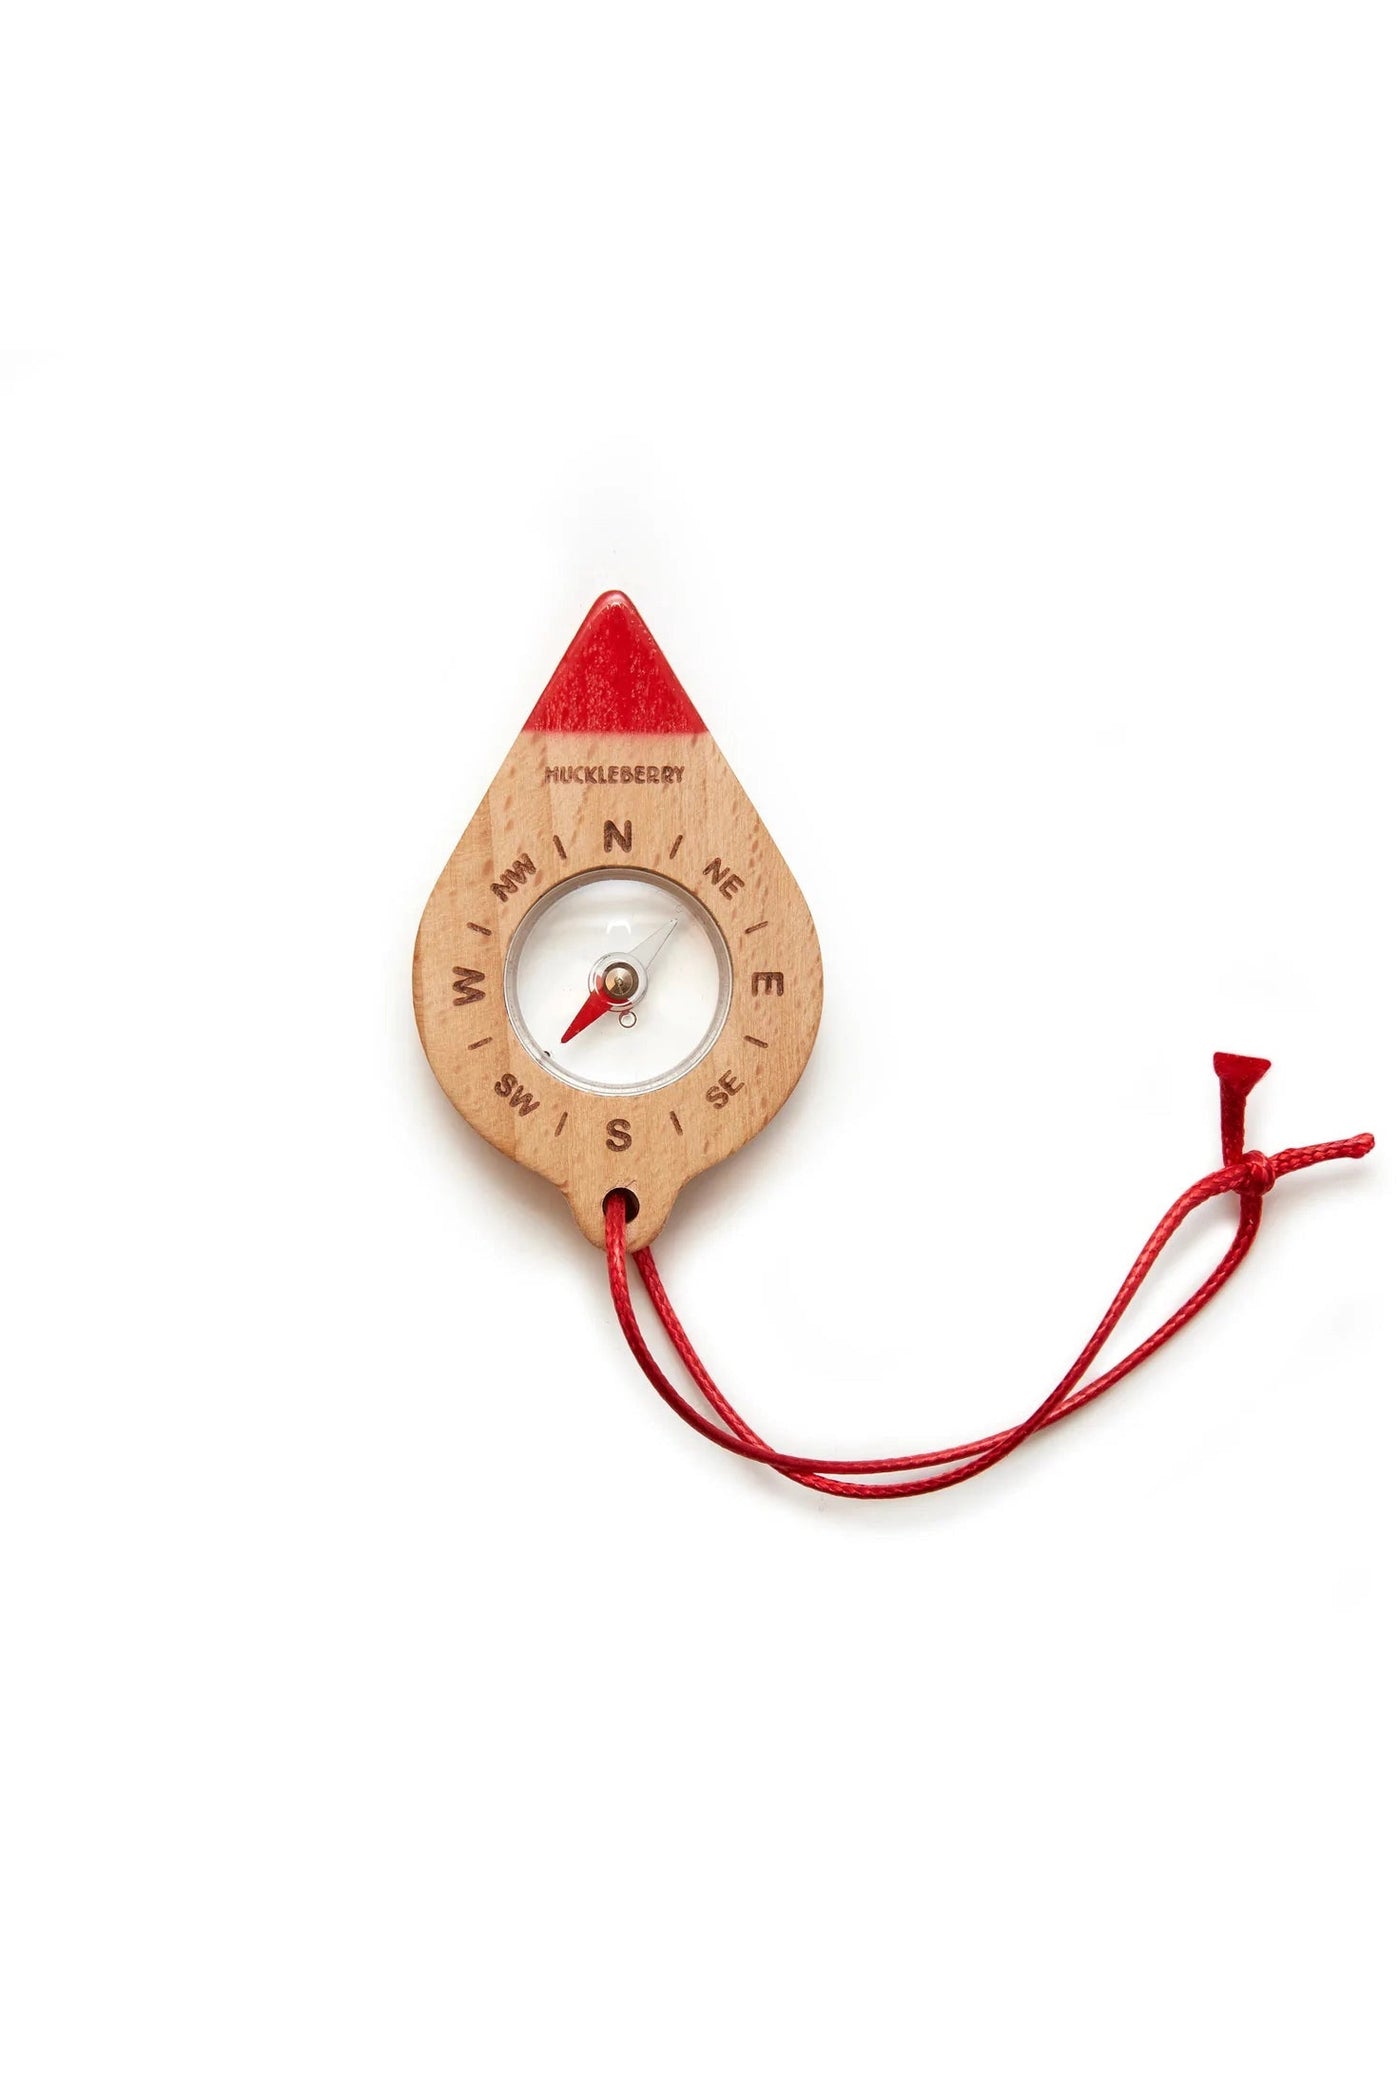 Huckleberry Compass-Accessories-Ohh! By Gum - Shop Sustainable